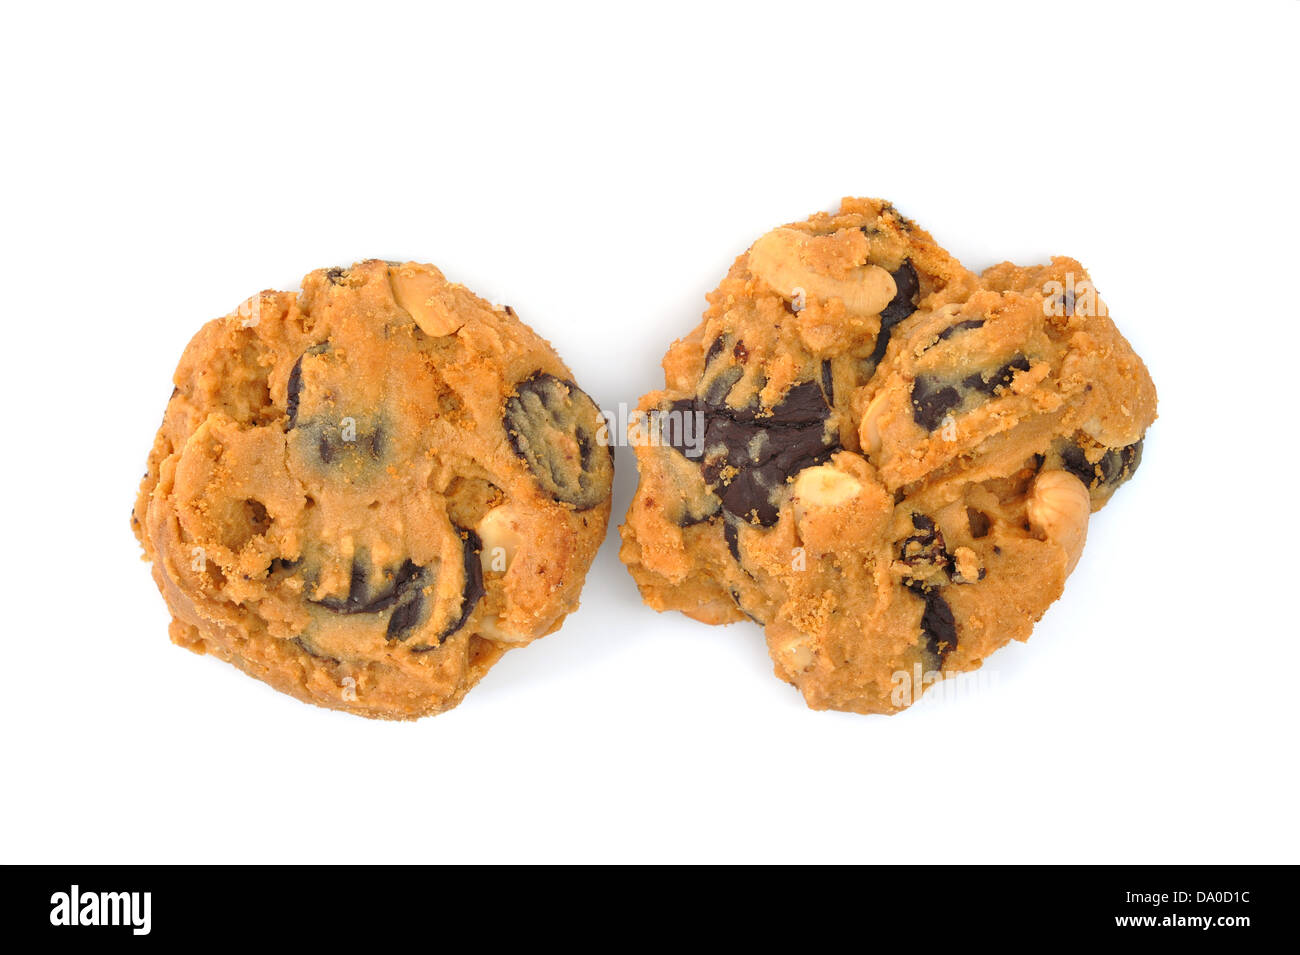 Chocolate Chip and Nut Cookies Stock Photo